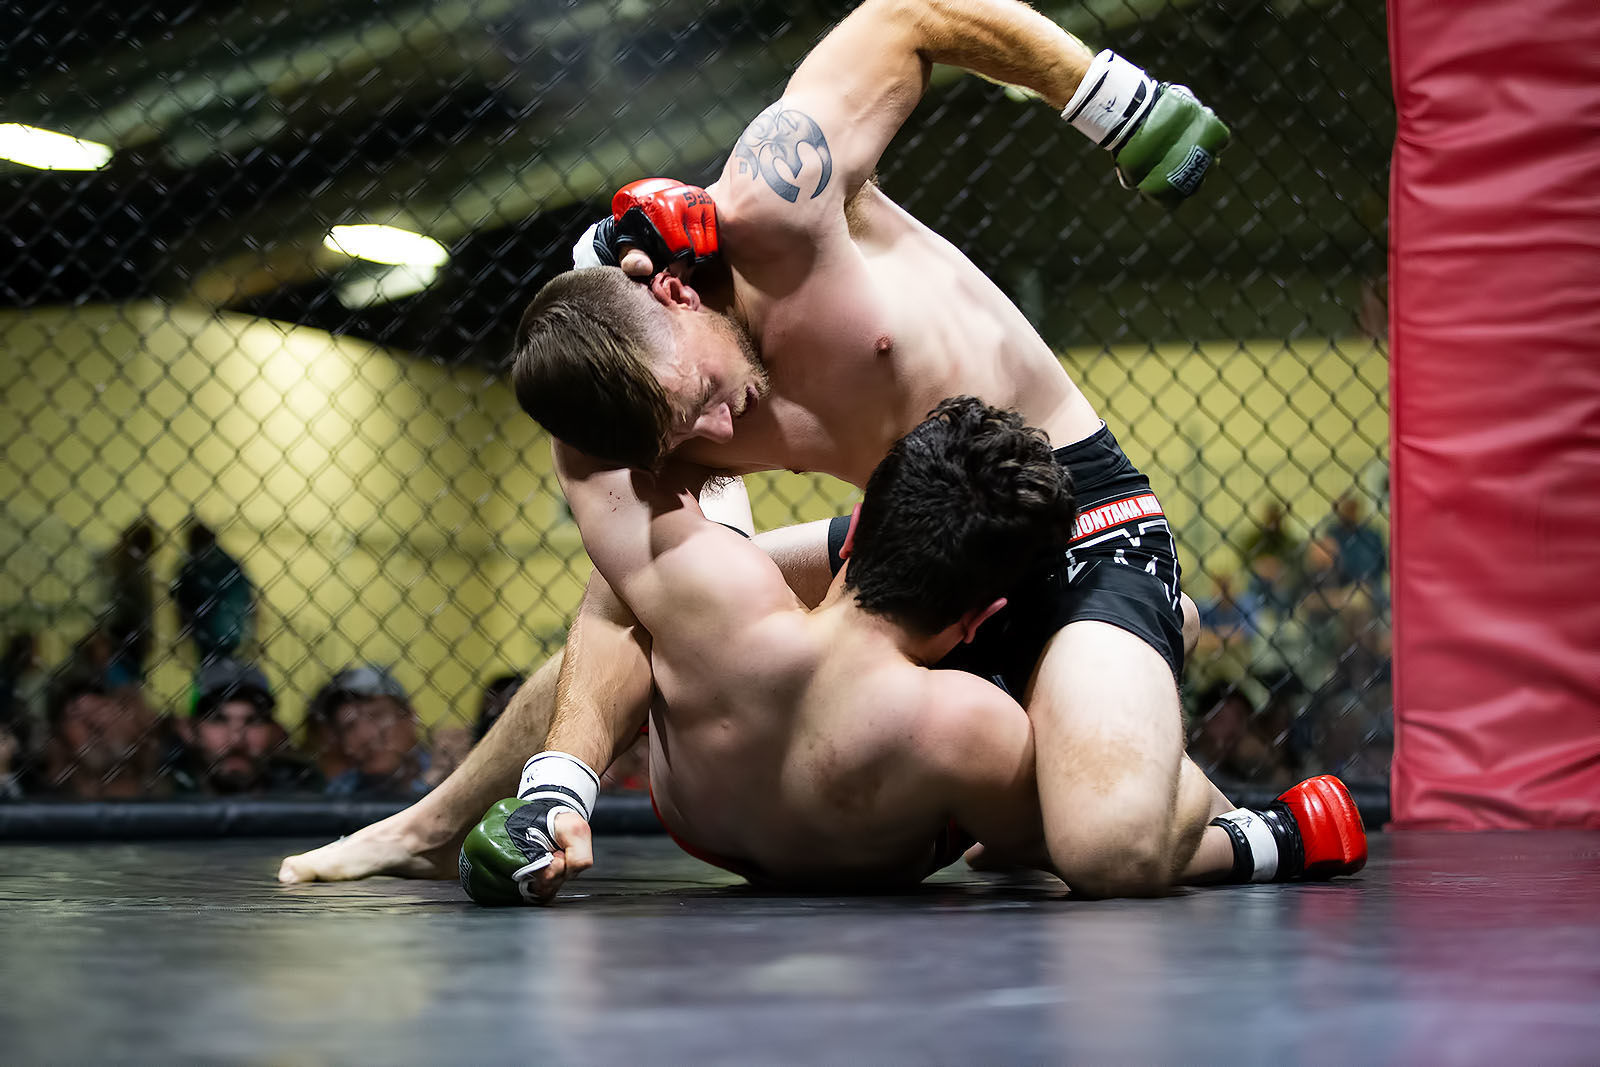 Amateur MMA fighters compete for the love of the sport photo